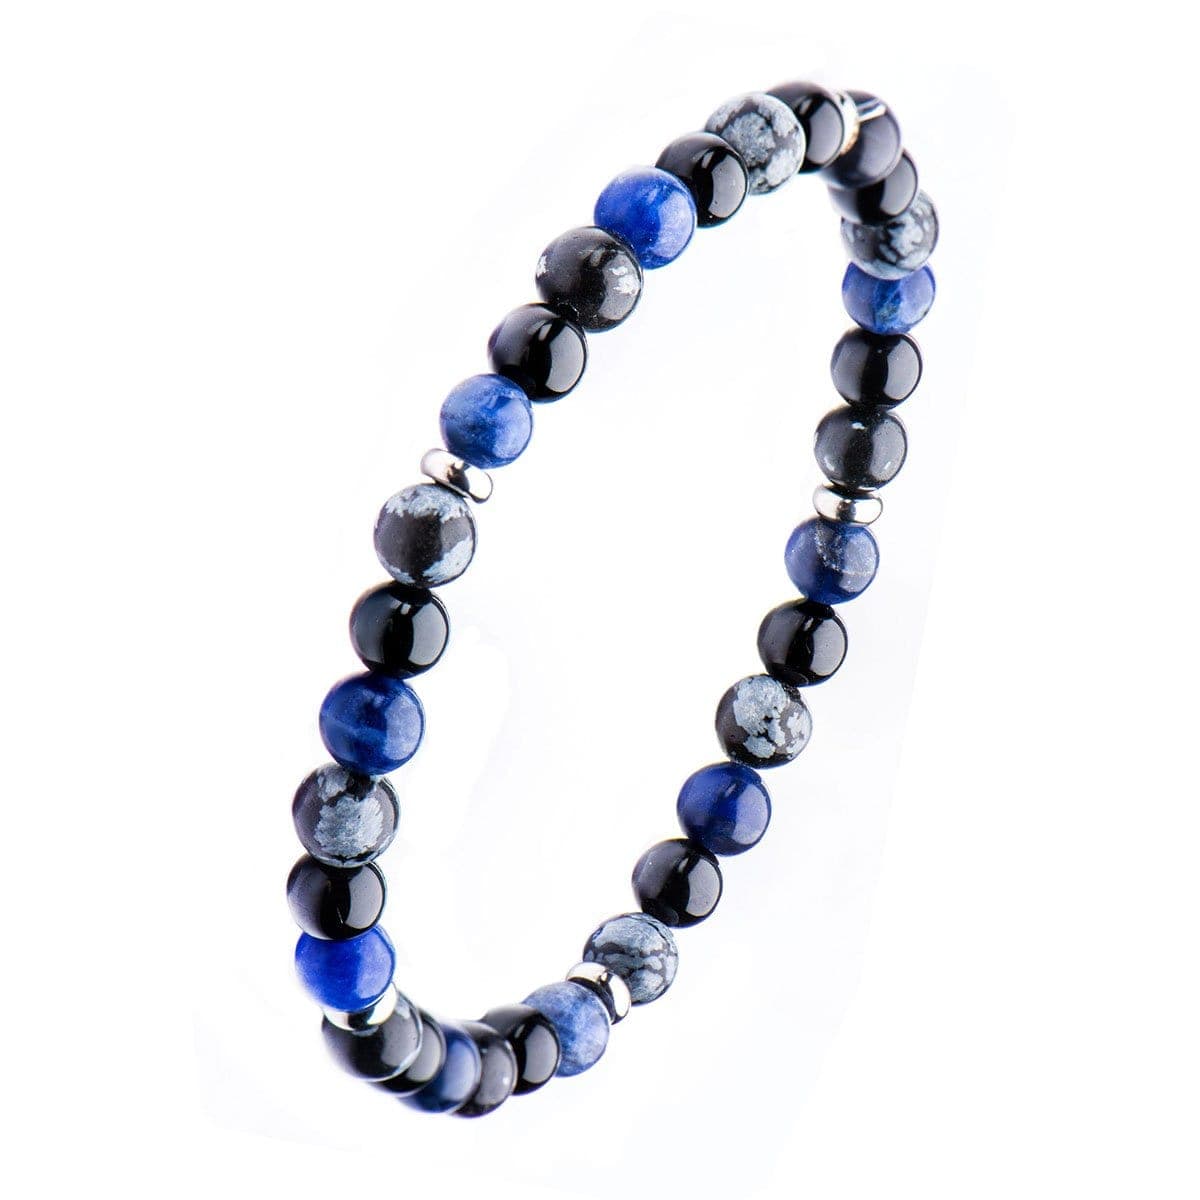 INOX JEWELRY Bracelets Black Agate, Blue Sodalite and Snowflake Stone 6mm Beads with Silver Tone Stainless Steel Detail Bracelet BRSS011